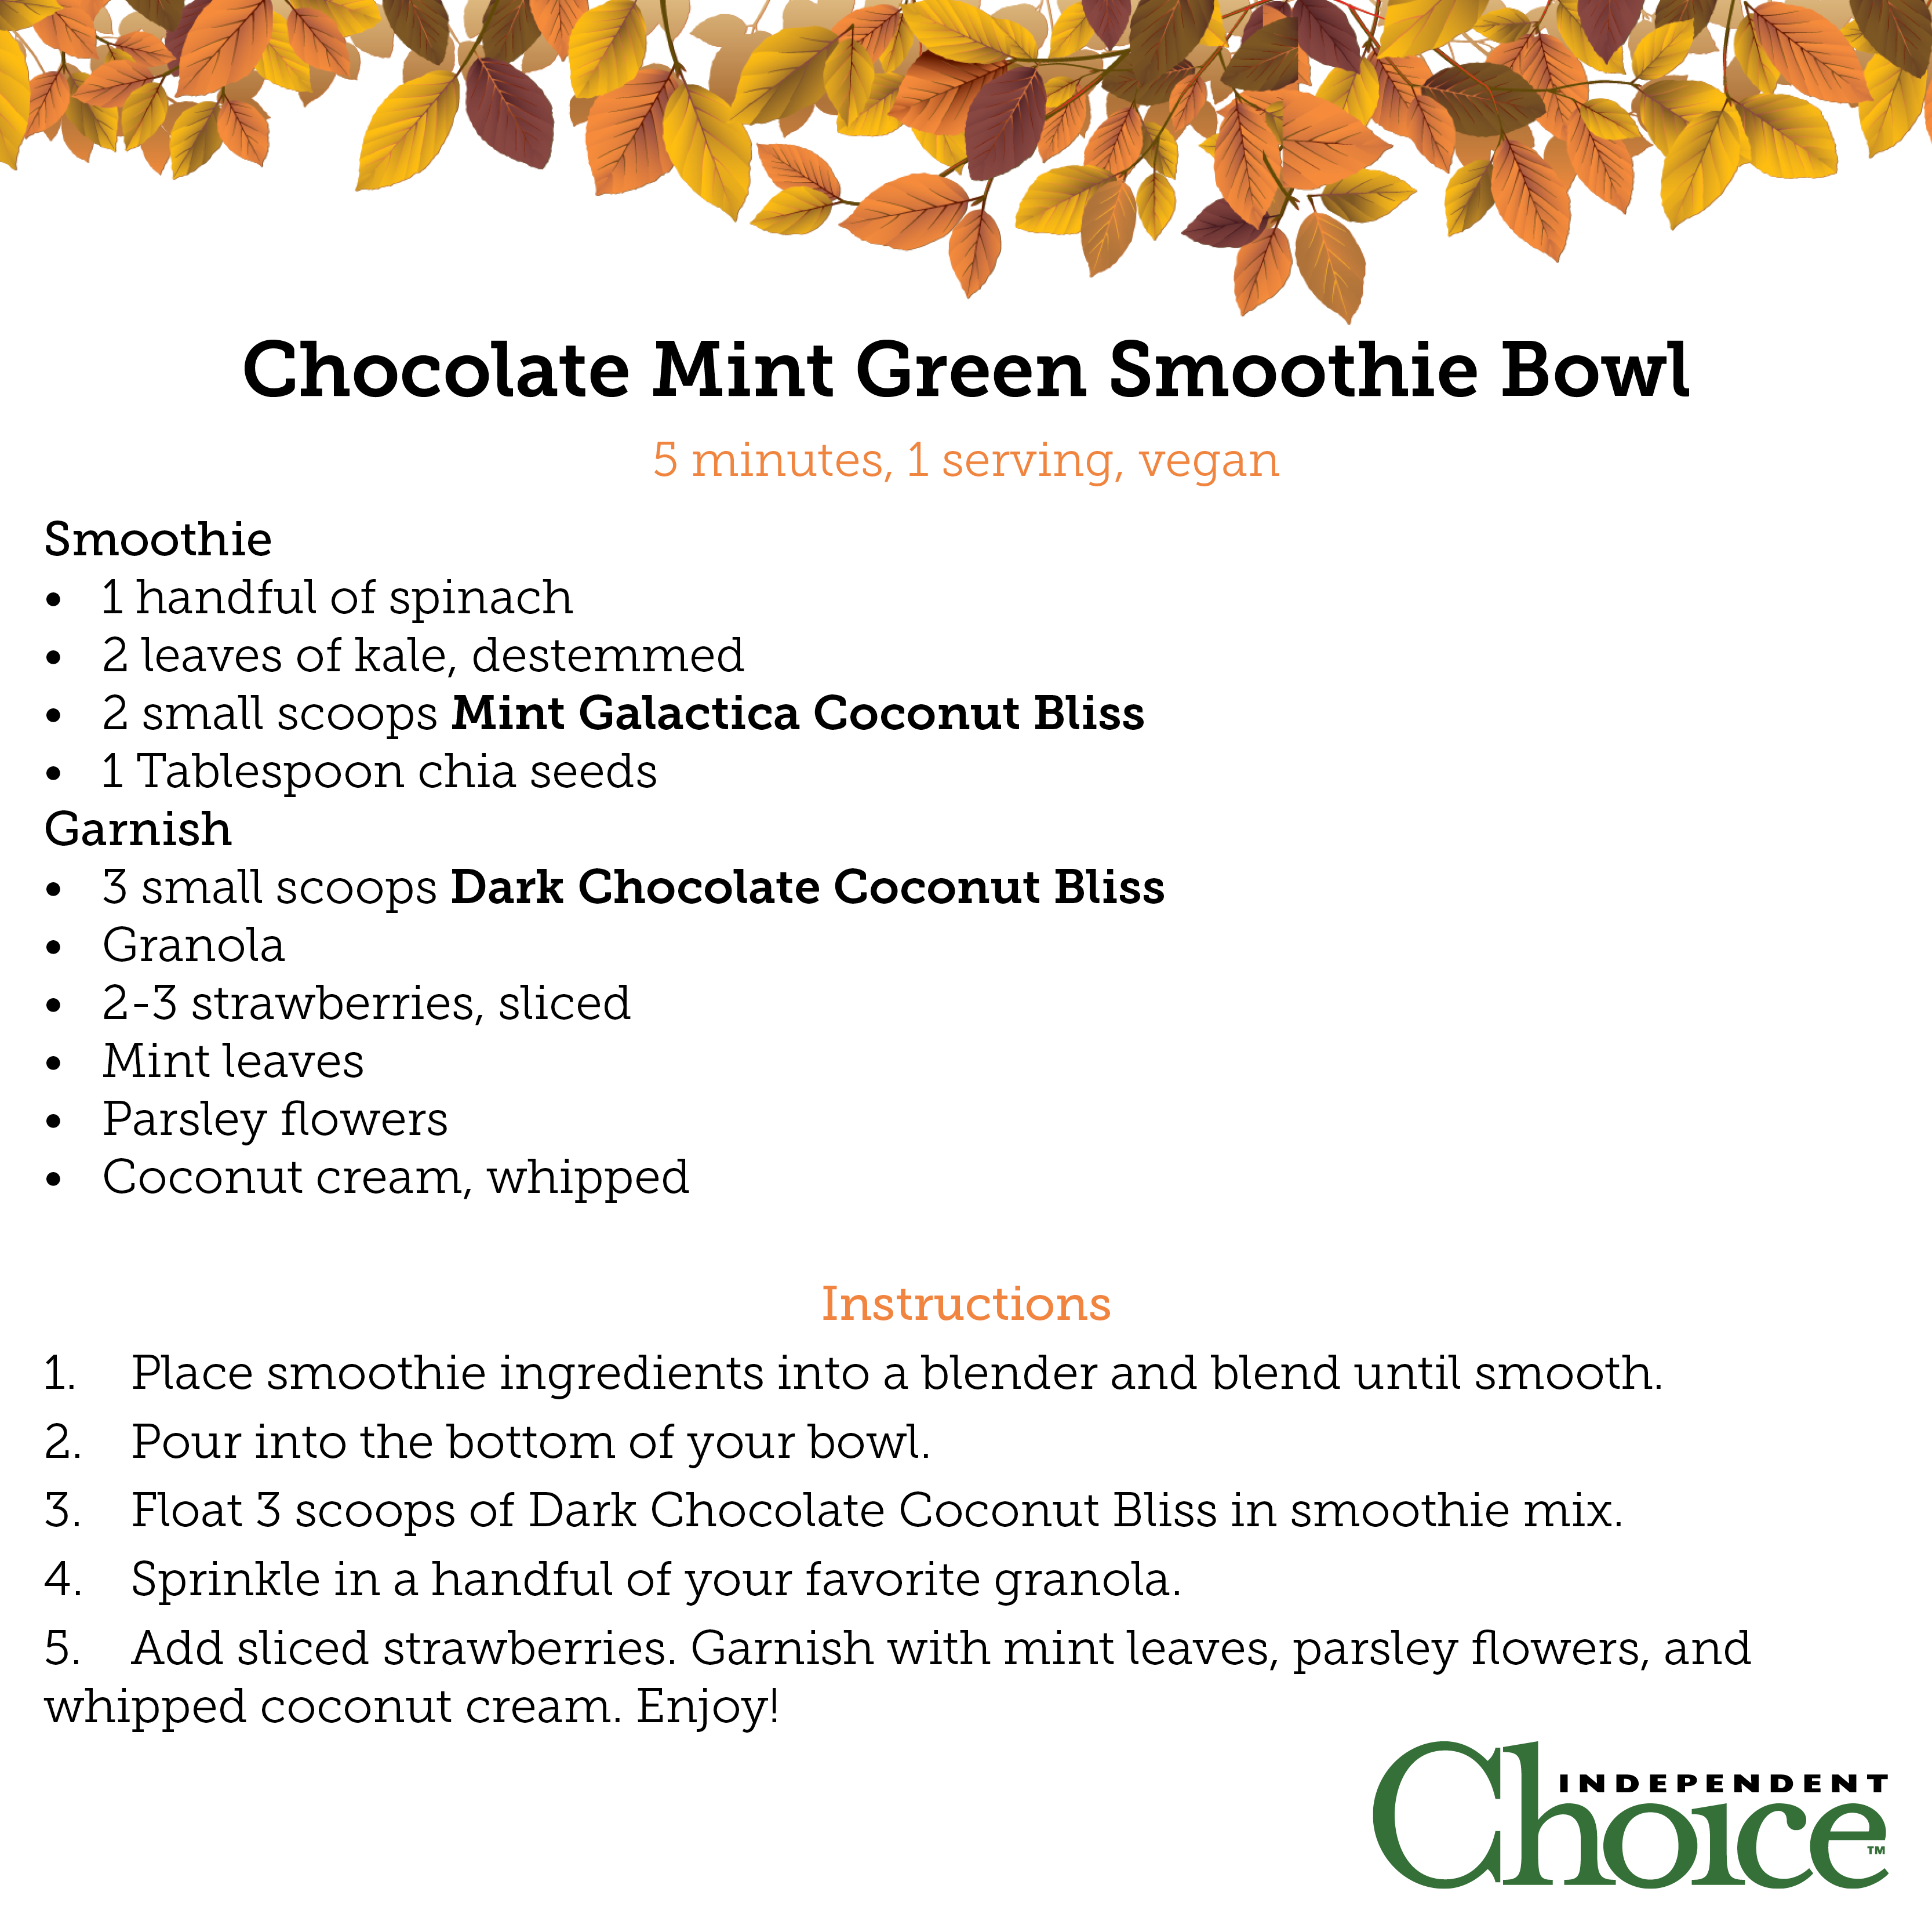 Chocolate Mint Green Smoothie Bowl